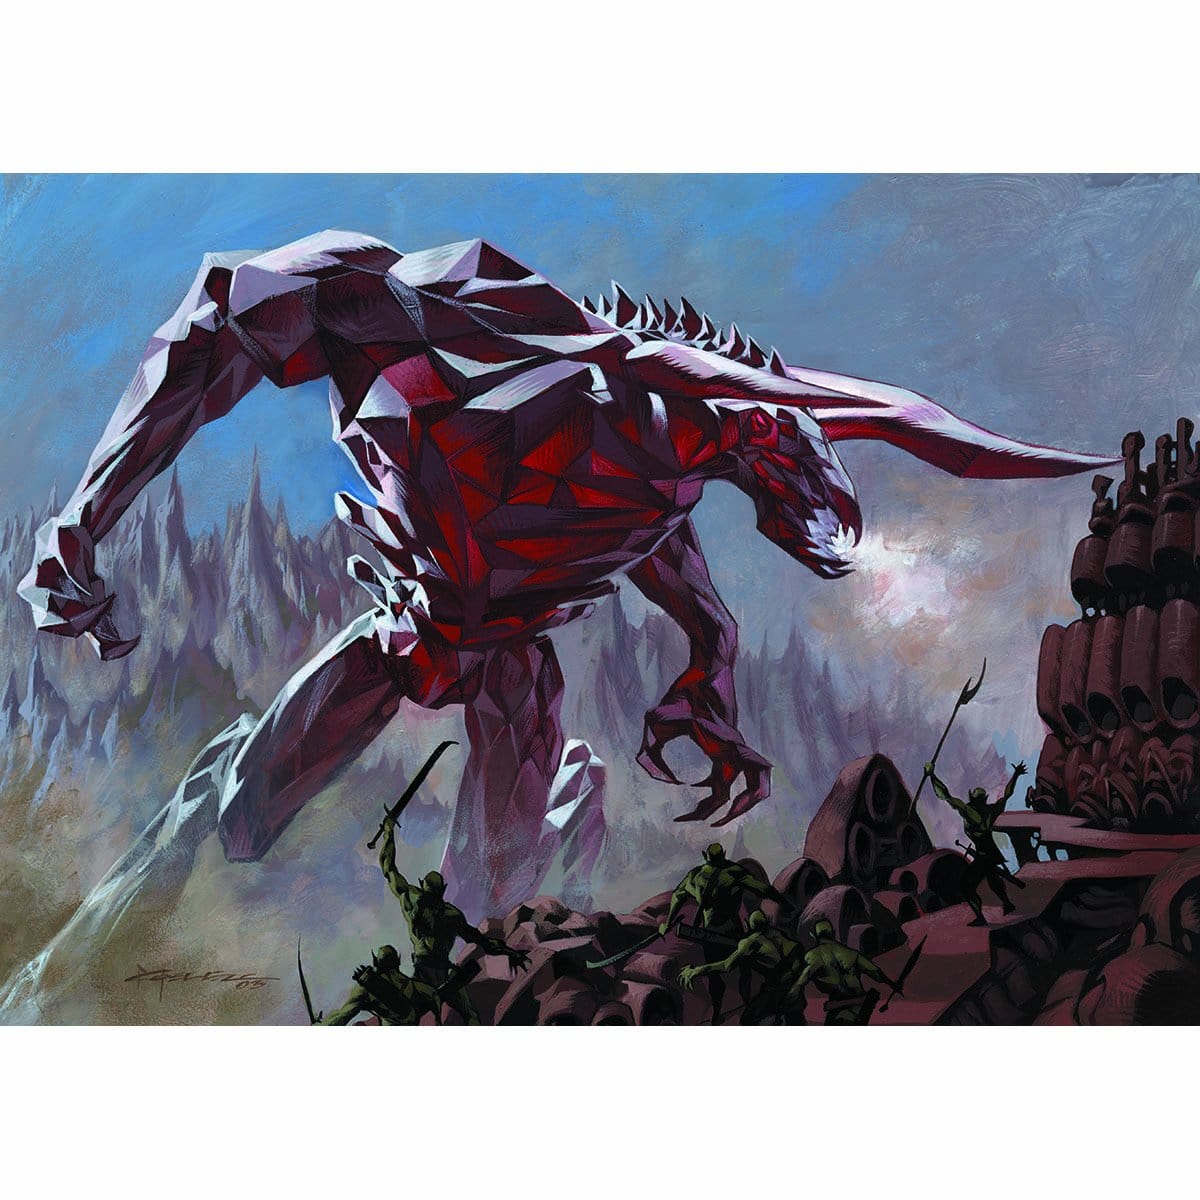 Bringer of the Red Dawn Print - Print - Original Magic Art - Accessories for Magic the Gathering and other card games